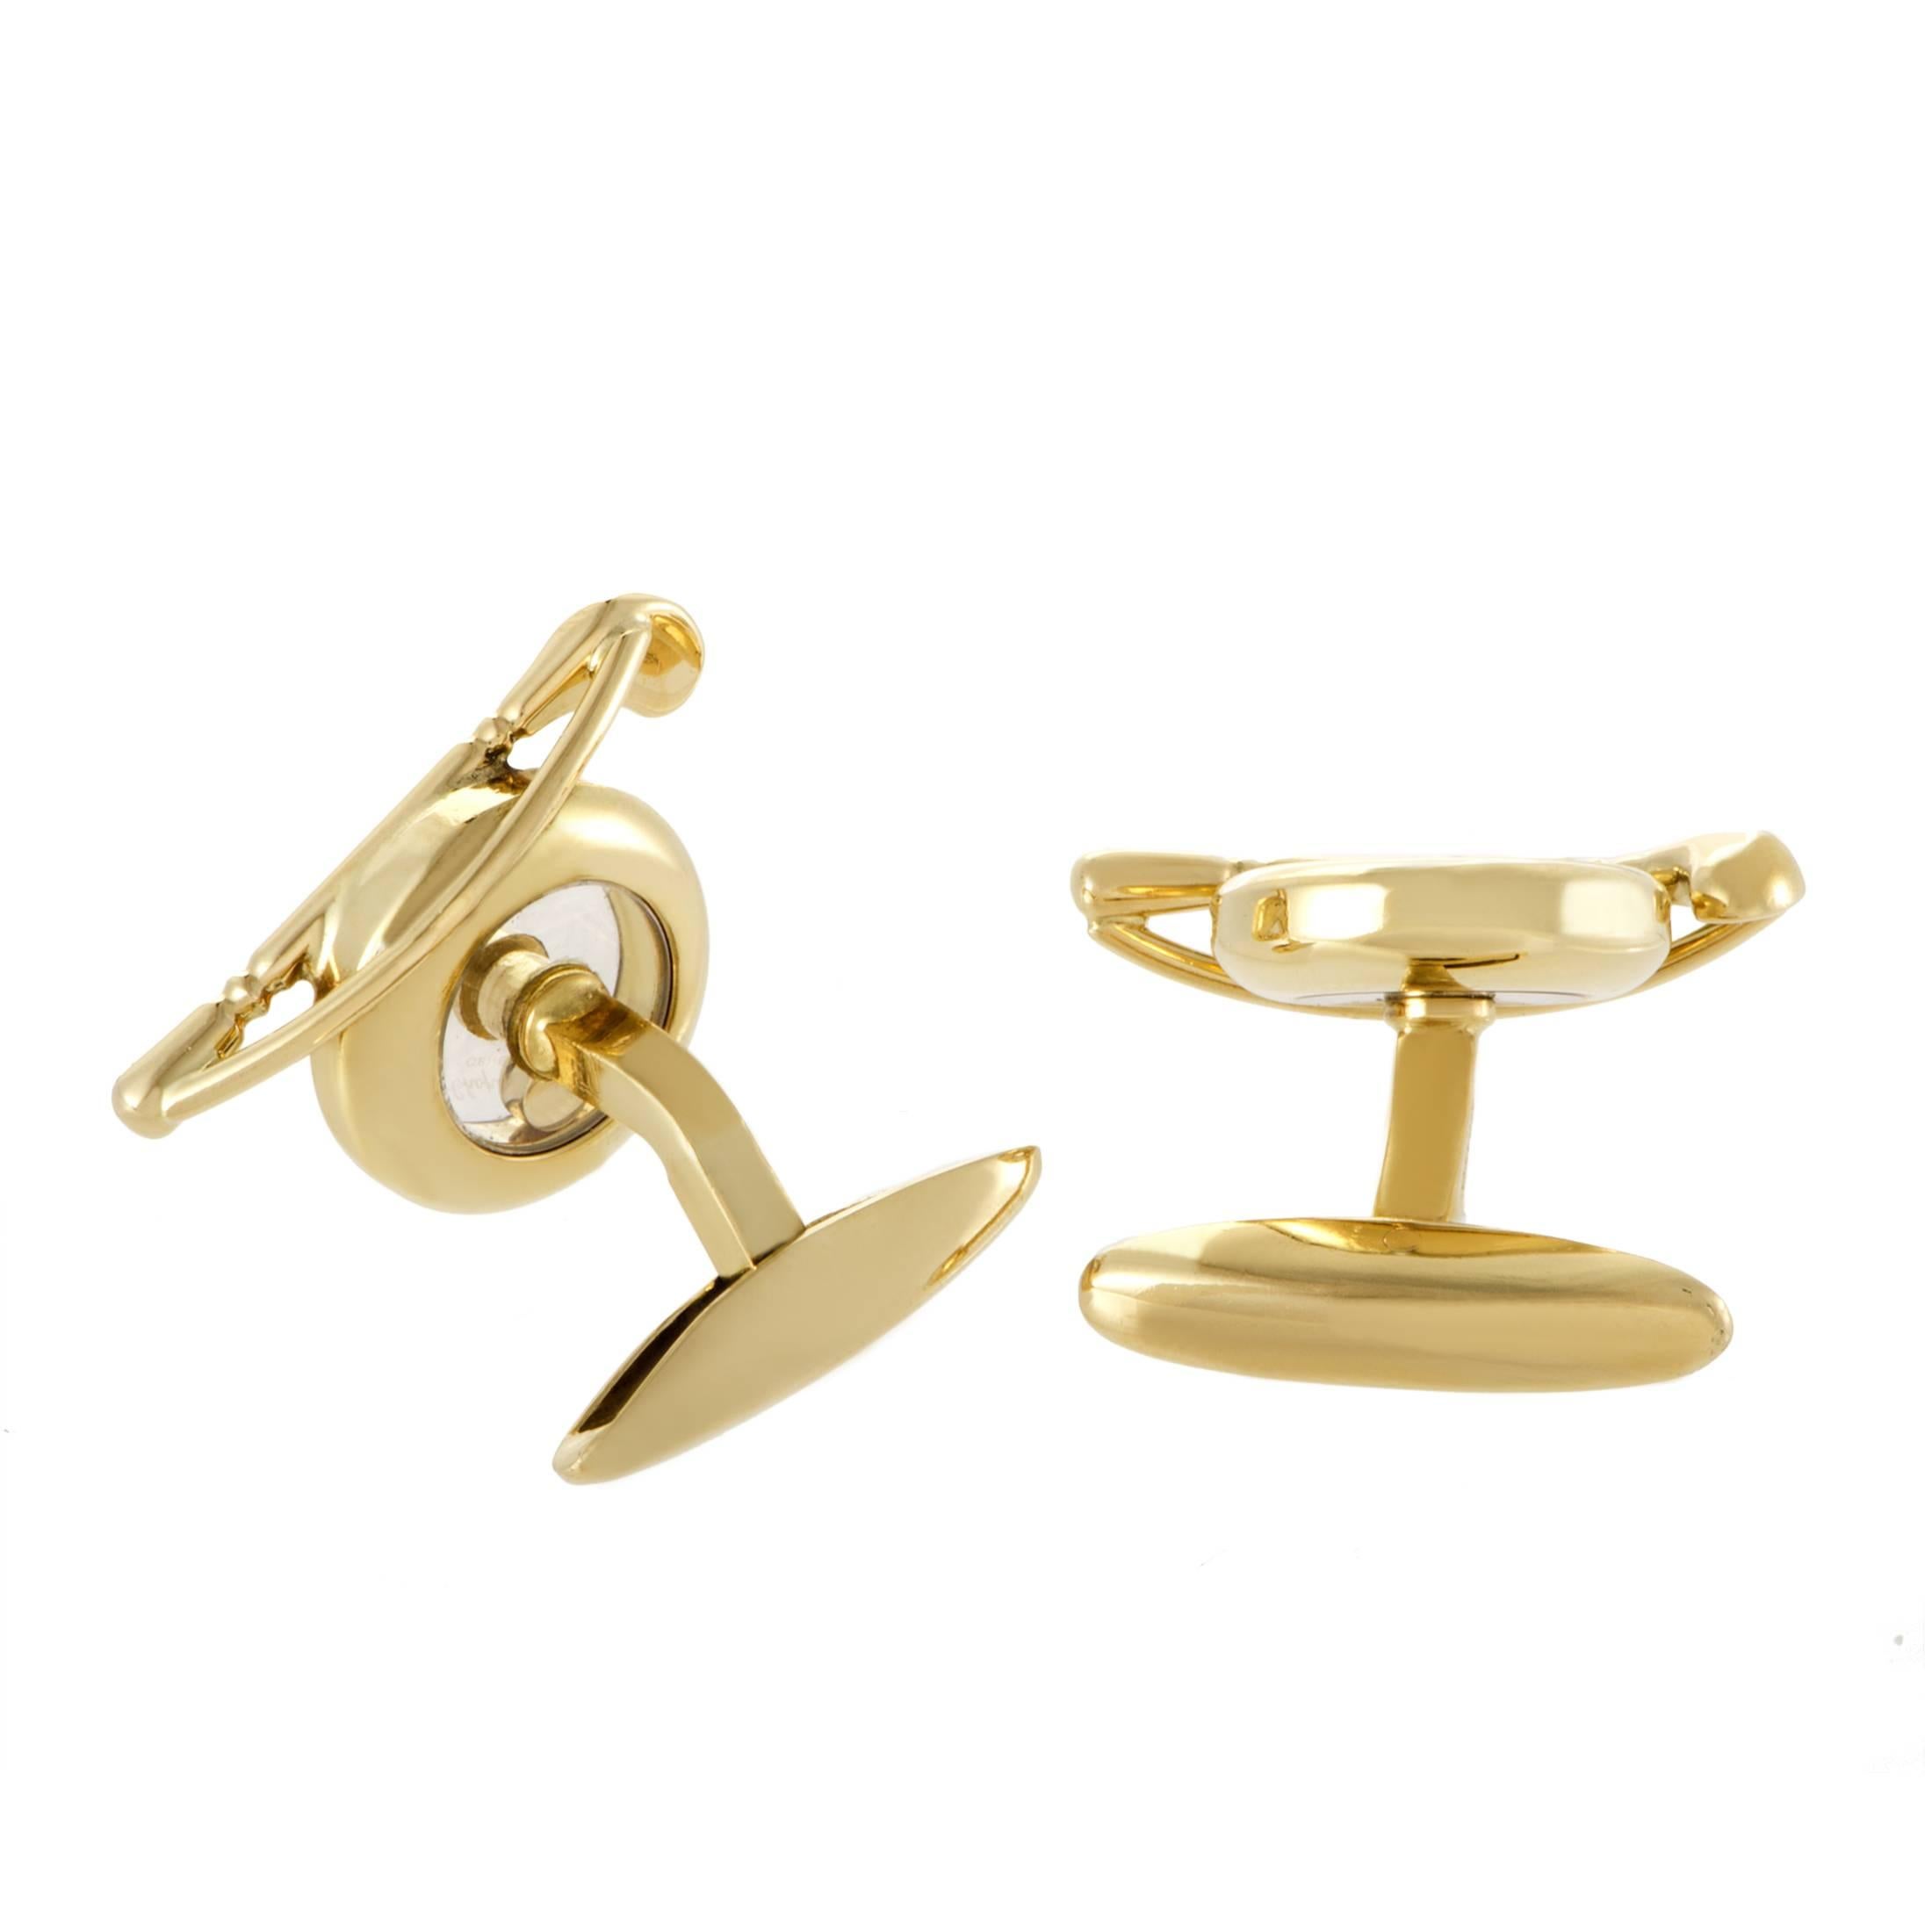 Employing their iconic feature of floating diamonds in a design that exudes aesthetic sophistication and traditional taste, Chopard created these sumptuous cufflinks which are made of luxurious 18K yellow gold for a compelling tone.